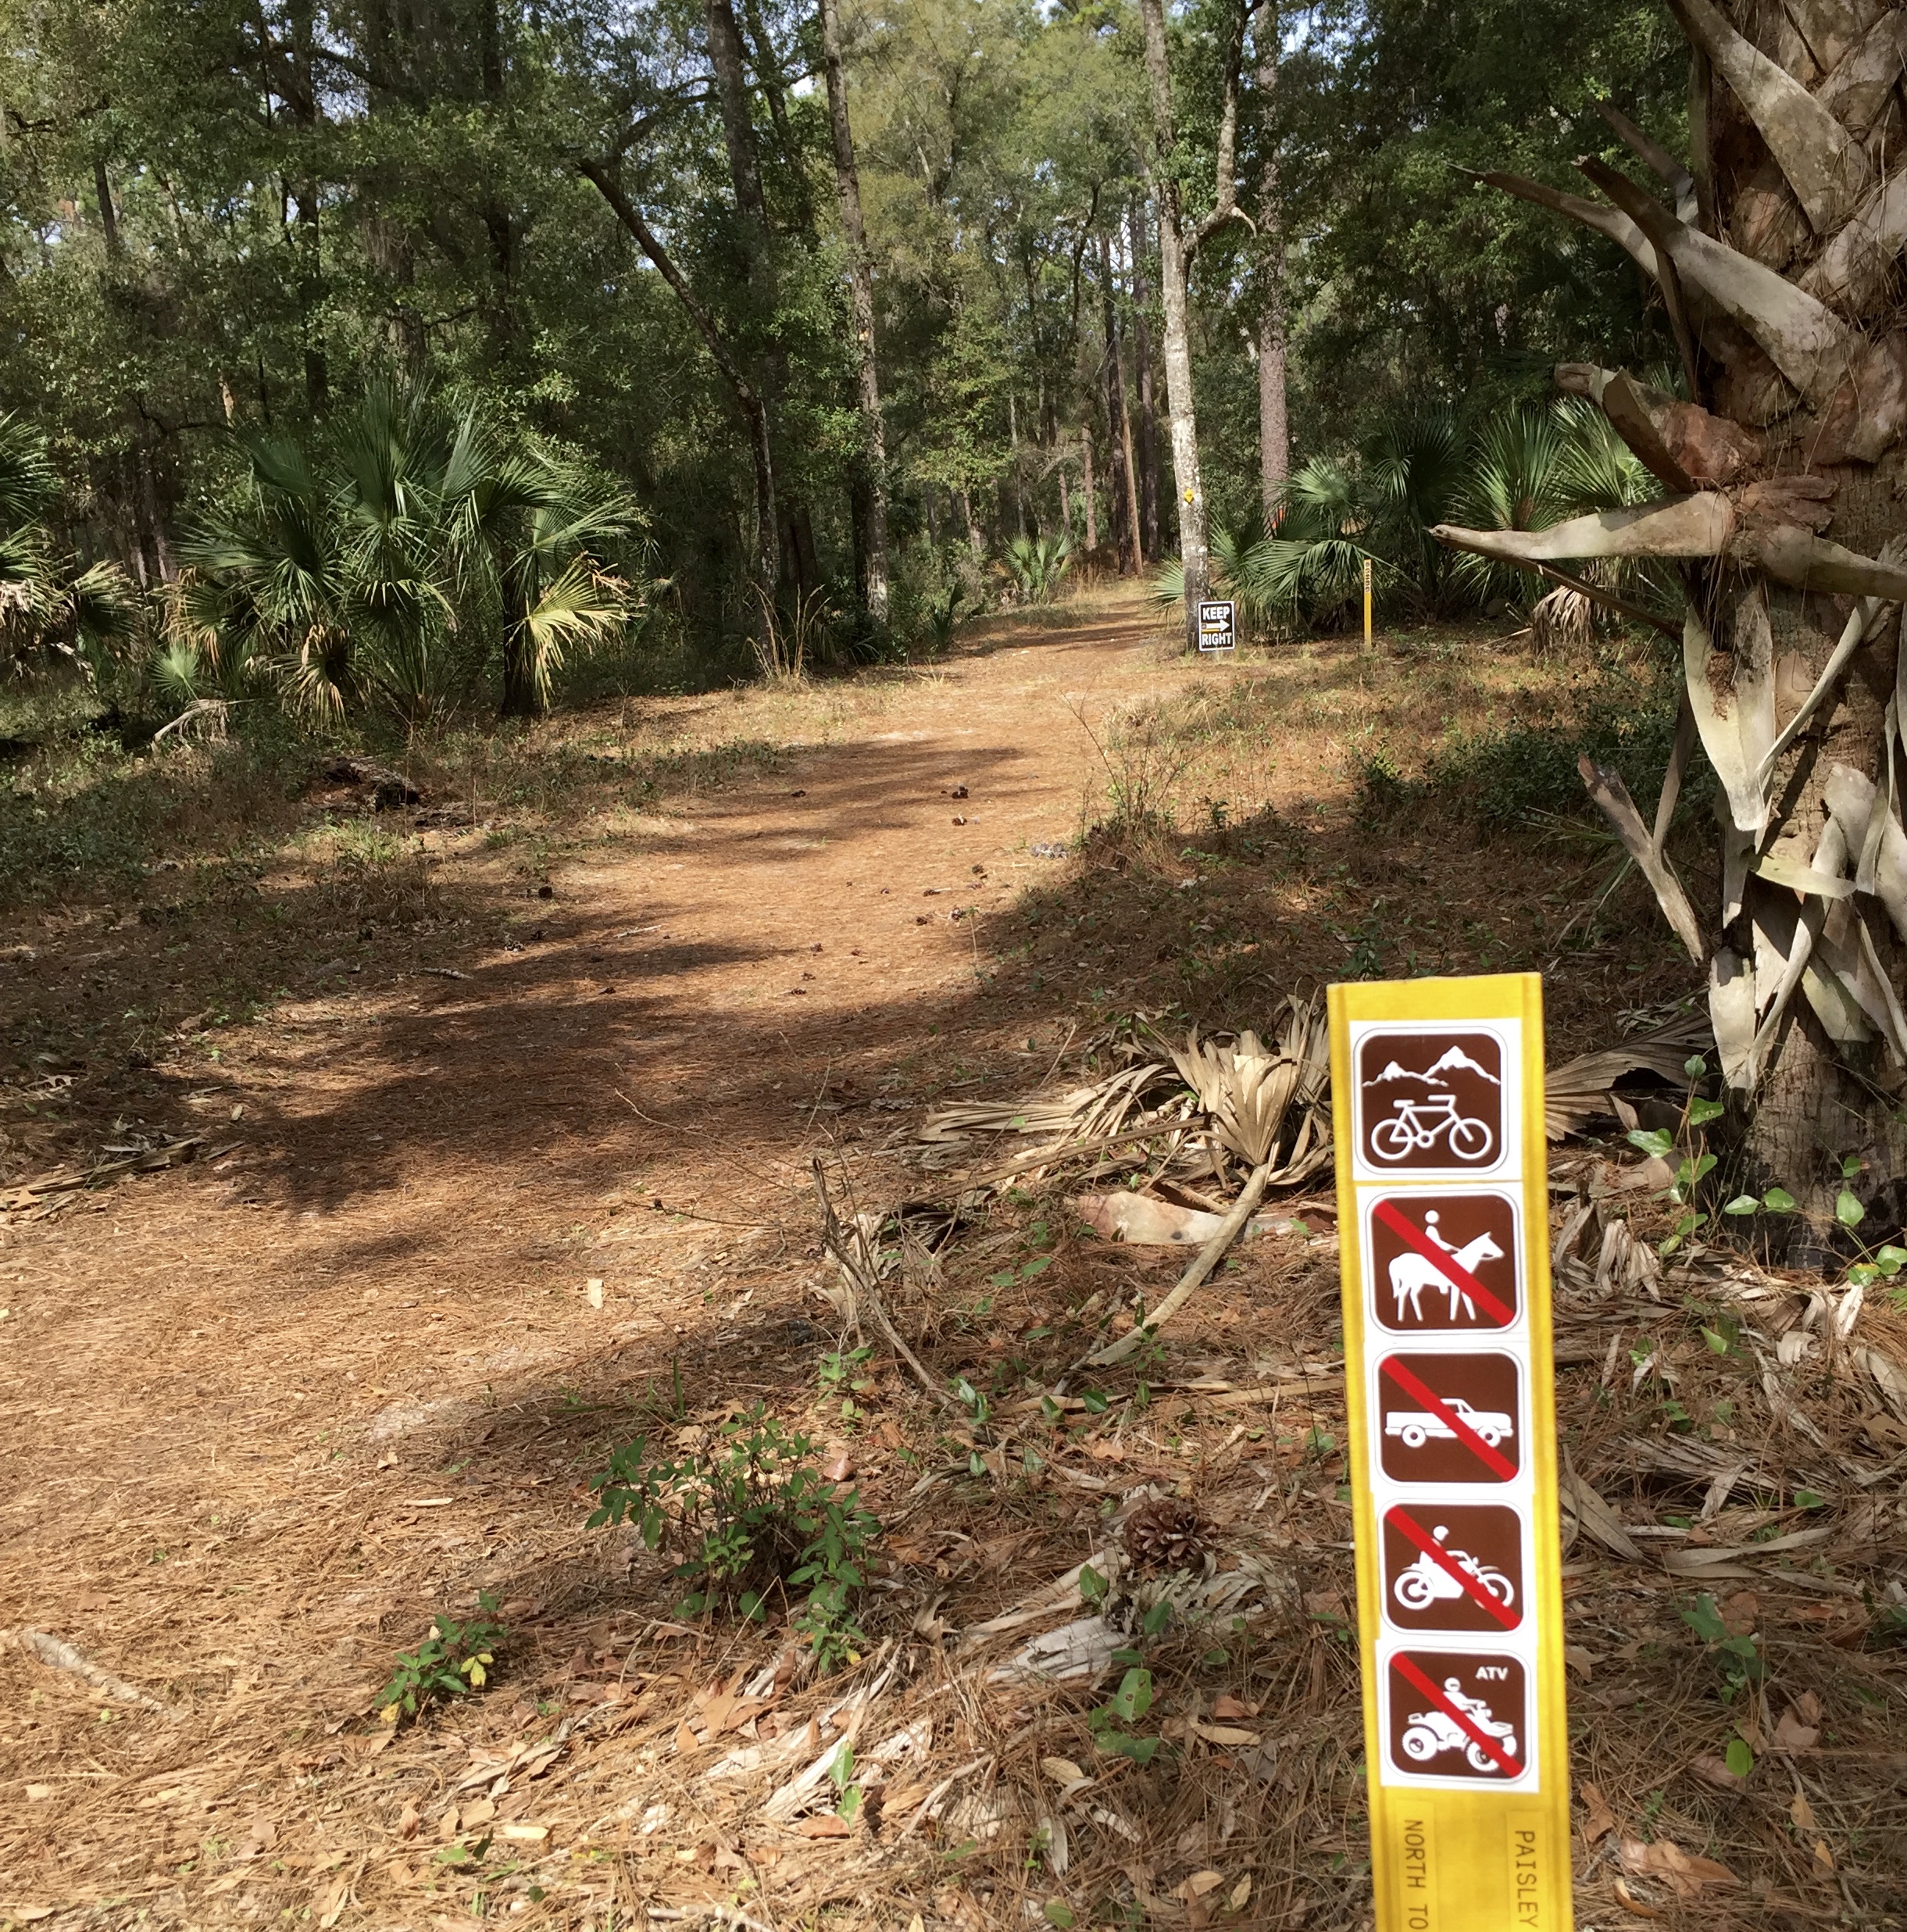 Mountain bike trail in Ocala National Forest.